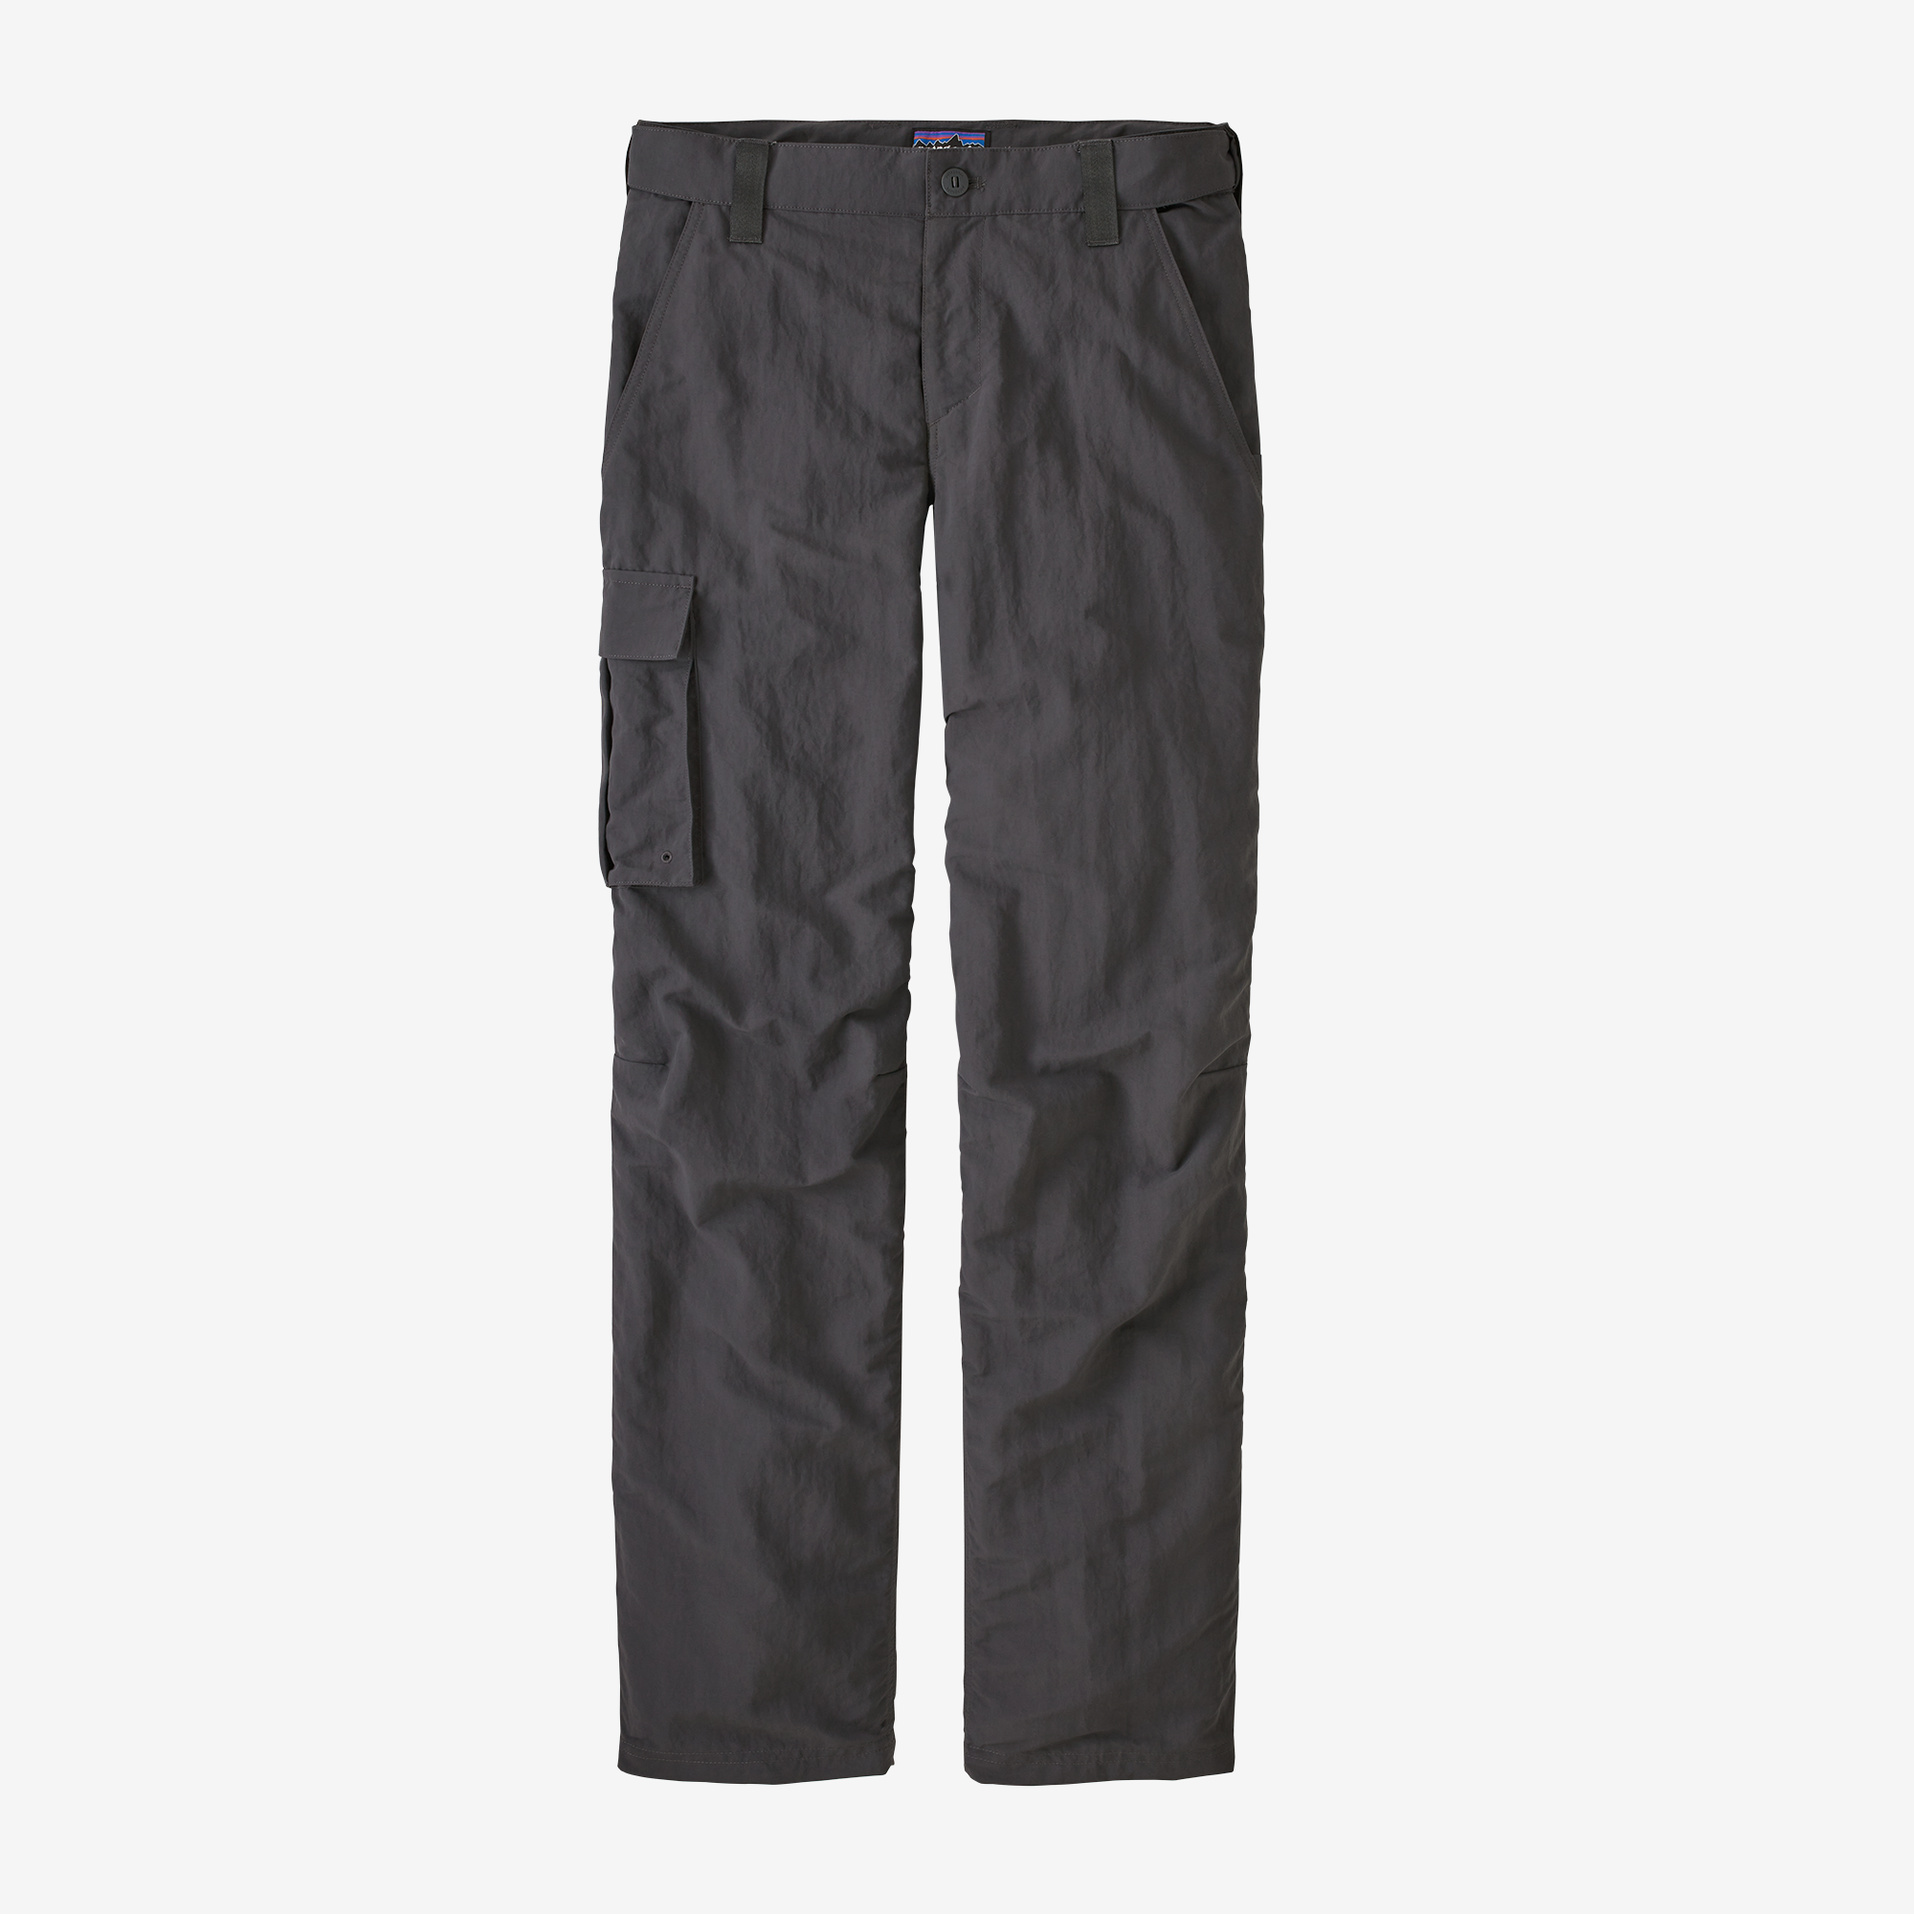 Patagonia M's Swiftcurrent Wet Wade Pants - Regular - Forge Grey - XXL